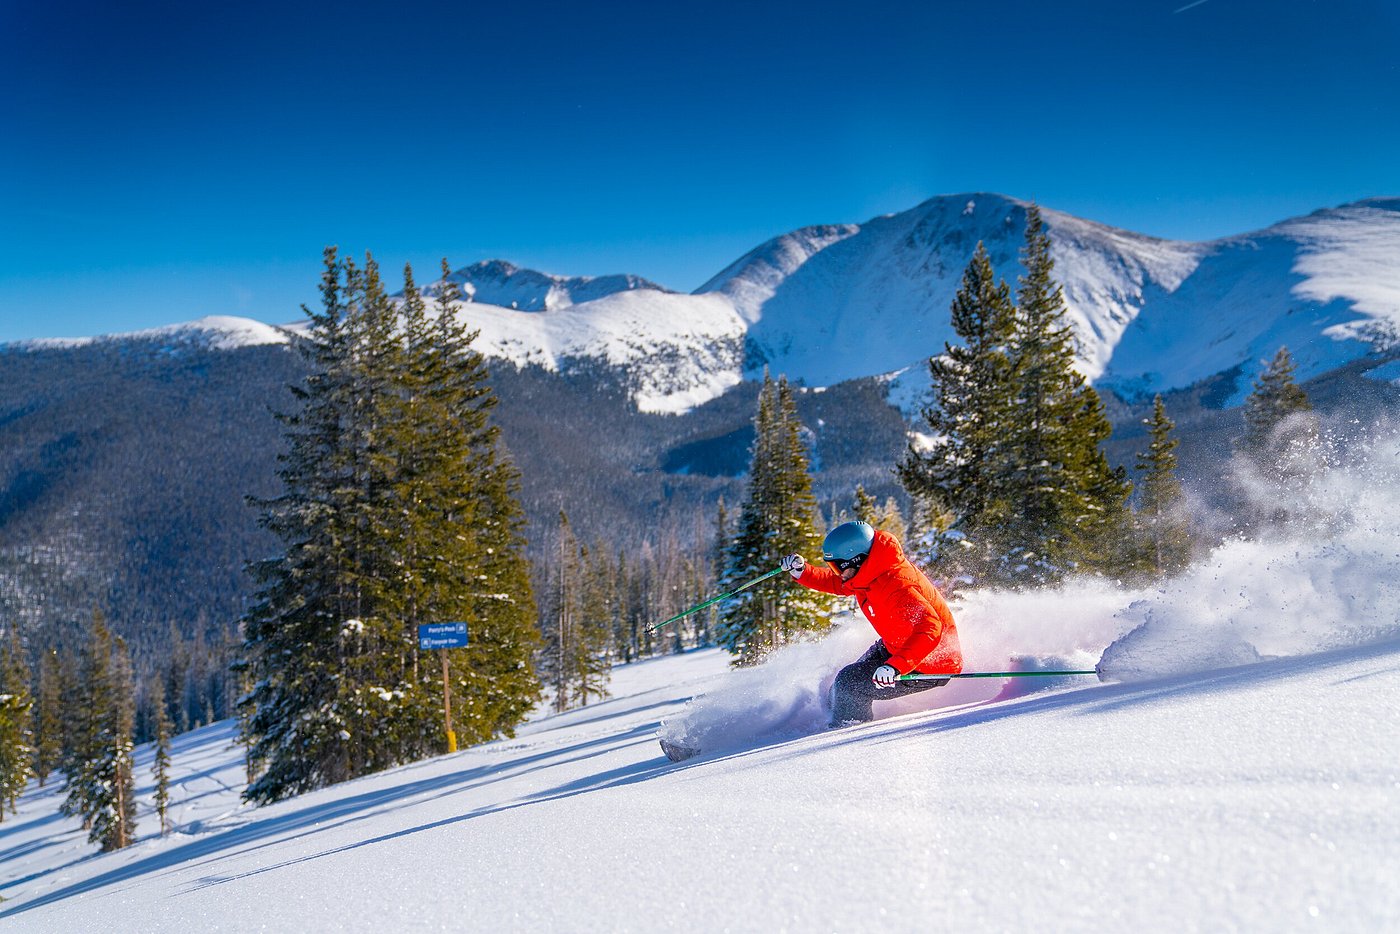 WINTER PARK RESORT Prices & Specialty Resort Reviews (CO)